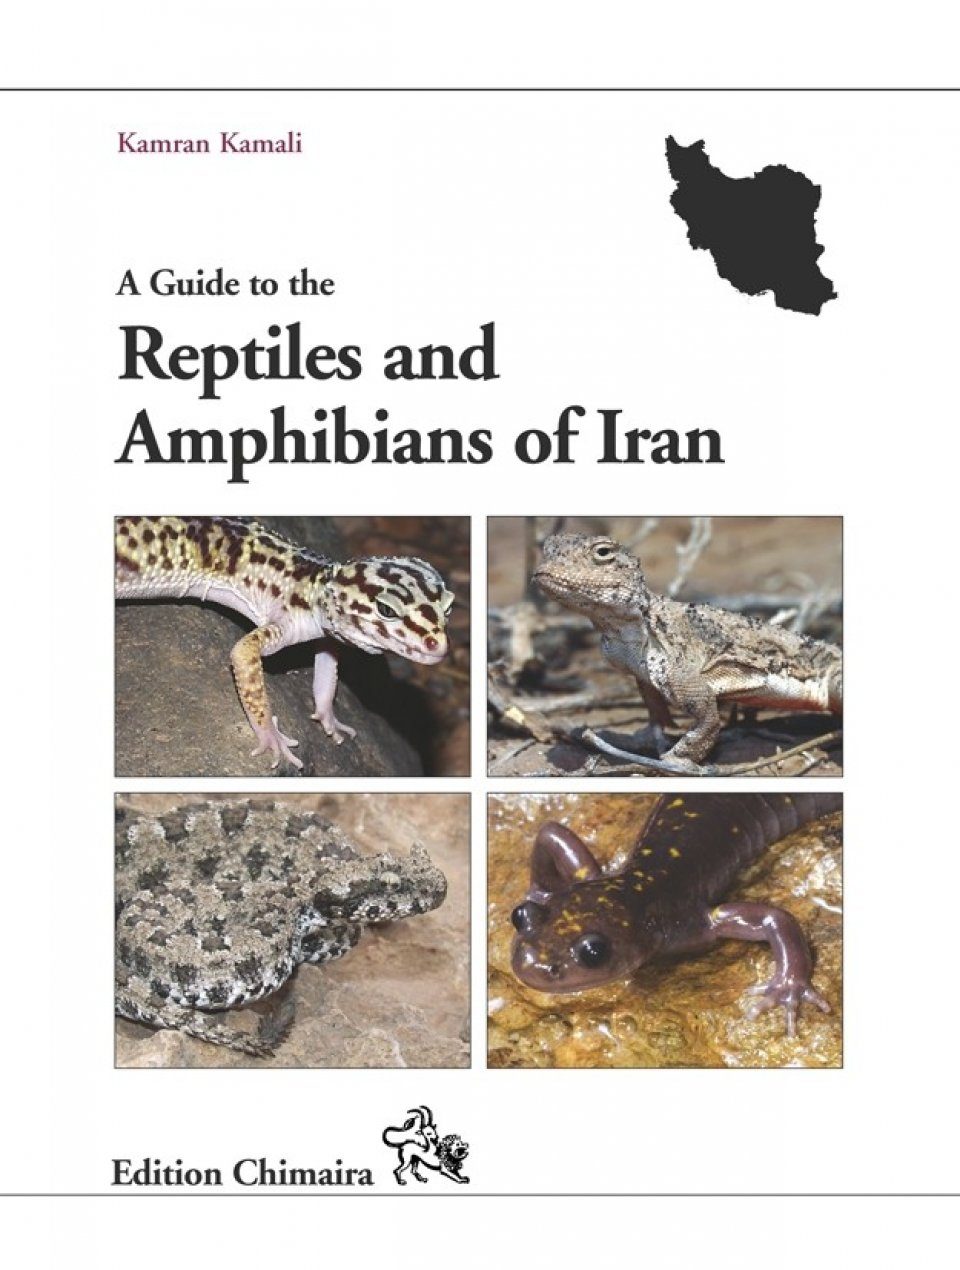 A　Reptiles　Field　Guides　the　and　Iran　Guide　of　NHBS　to　History　Amphibians　Natural